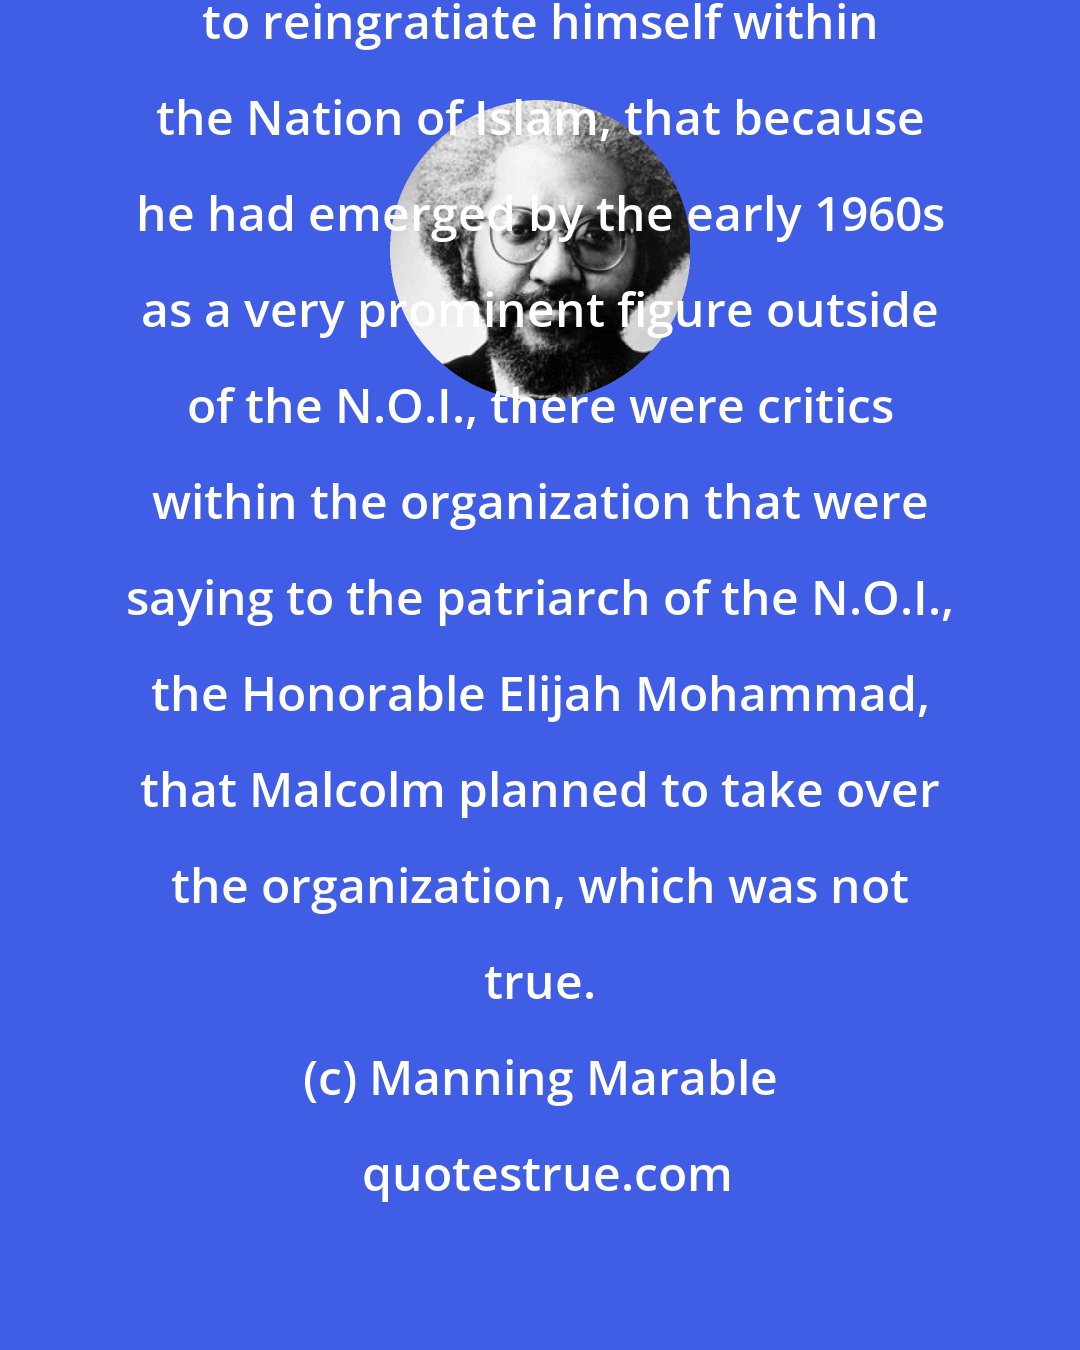 Manning Marable: Malcolm's X objective was actually to reingratiate himself within the Nation of Islam, that because he had emerged by the early 1960s as a very prominent figure outside of the N.O.I., there were critics within the organization that were saying to the patriarch of the N.O.I., the Honorable Elijah Mohammad, that Malcolm planned to take over the organization, which was not true.